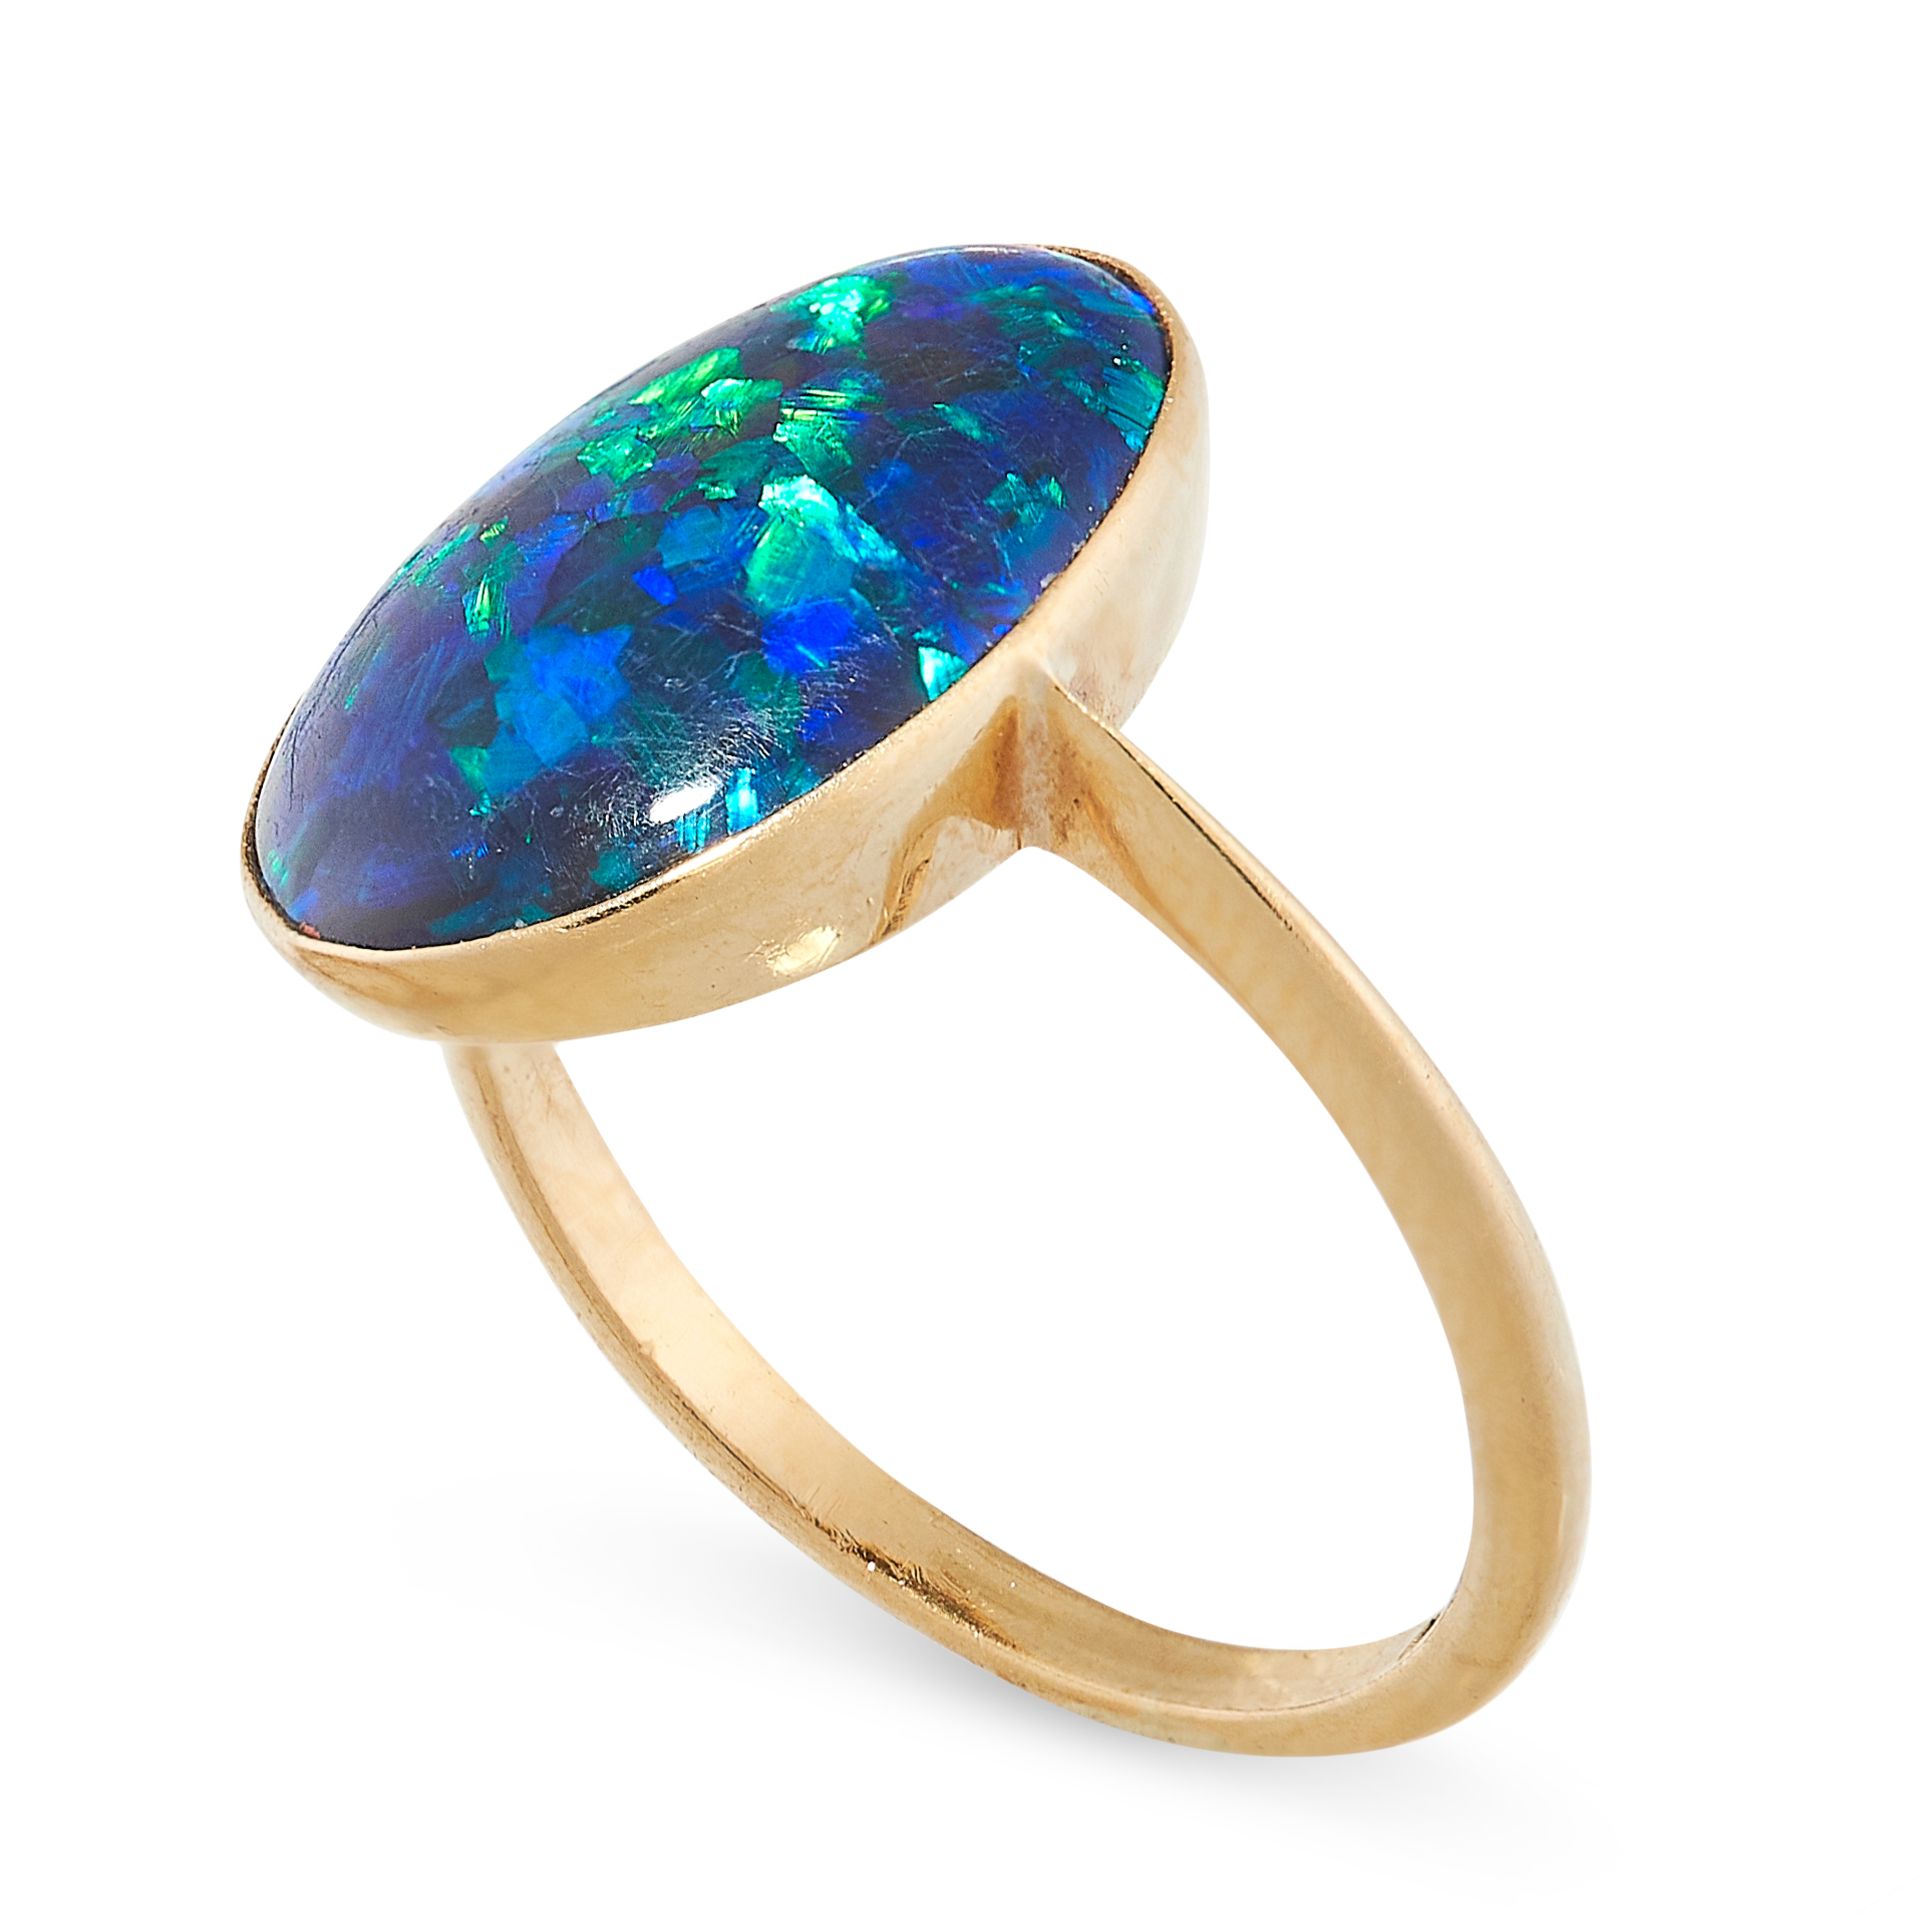 BLACK OPAL RING in 18ct yellow gold, set with a black opal cabochon of 3.54 carats, J.A maker’s - Image 2 of 2